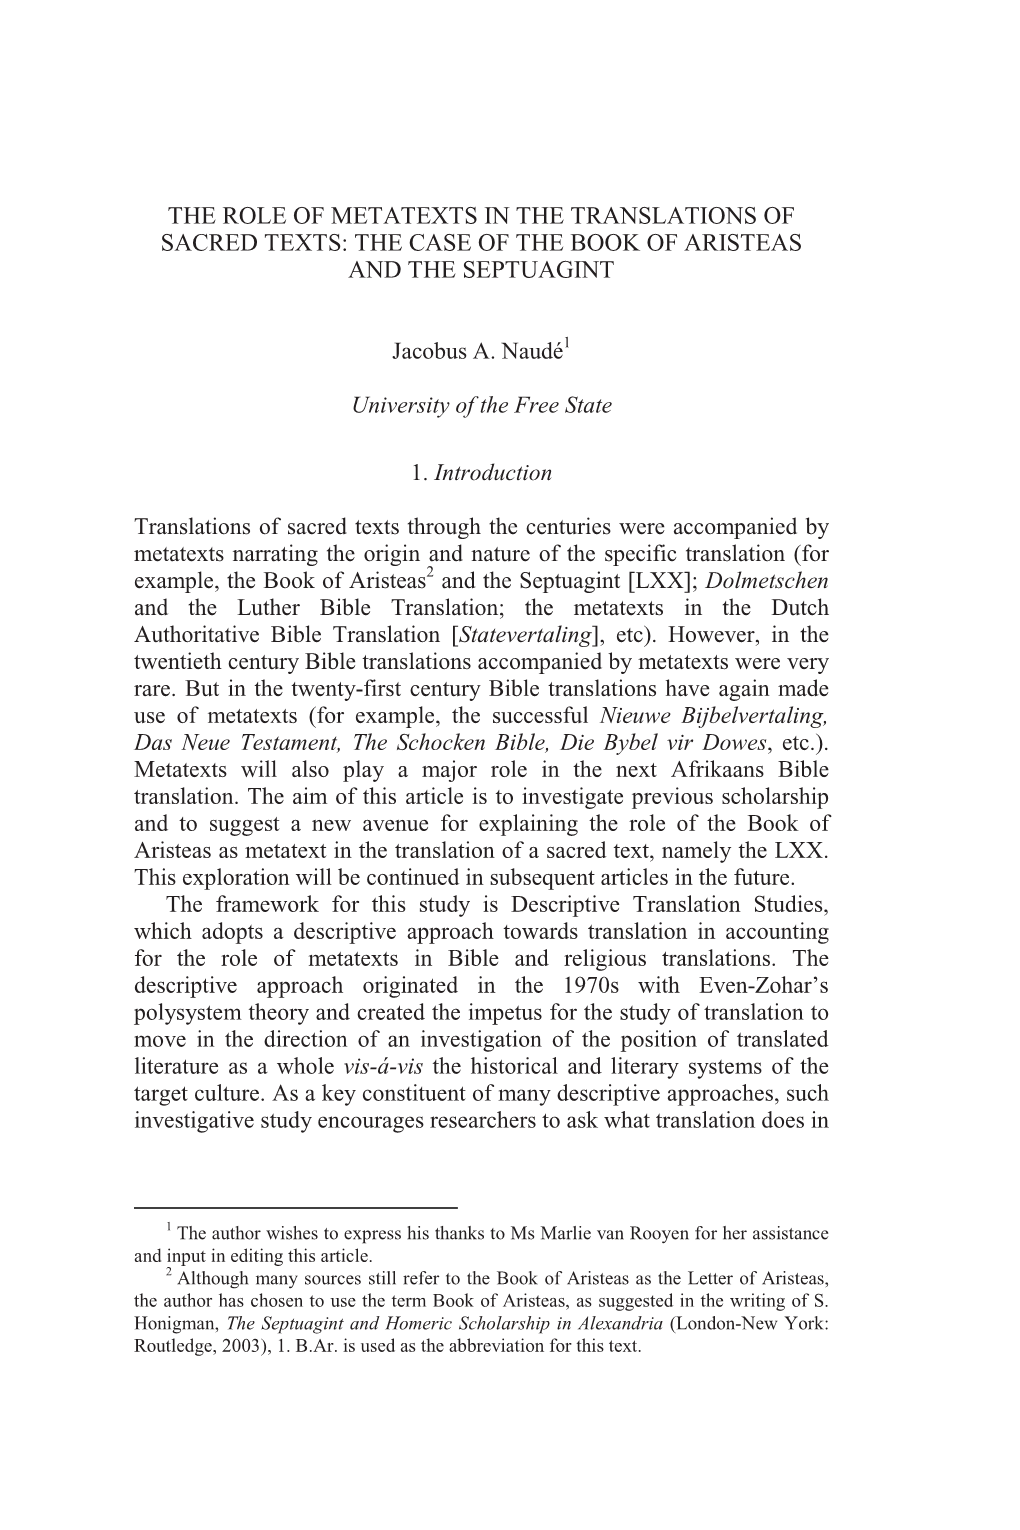 The Role of Metatexts in the Translations of Sacred Texts: the Case of the Book of Aristeas and the Septuagint